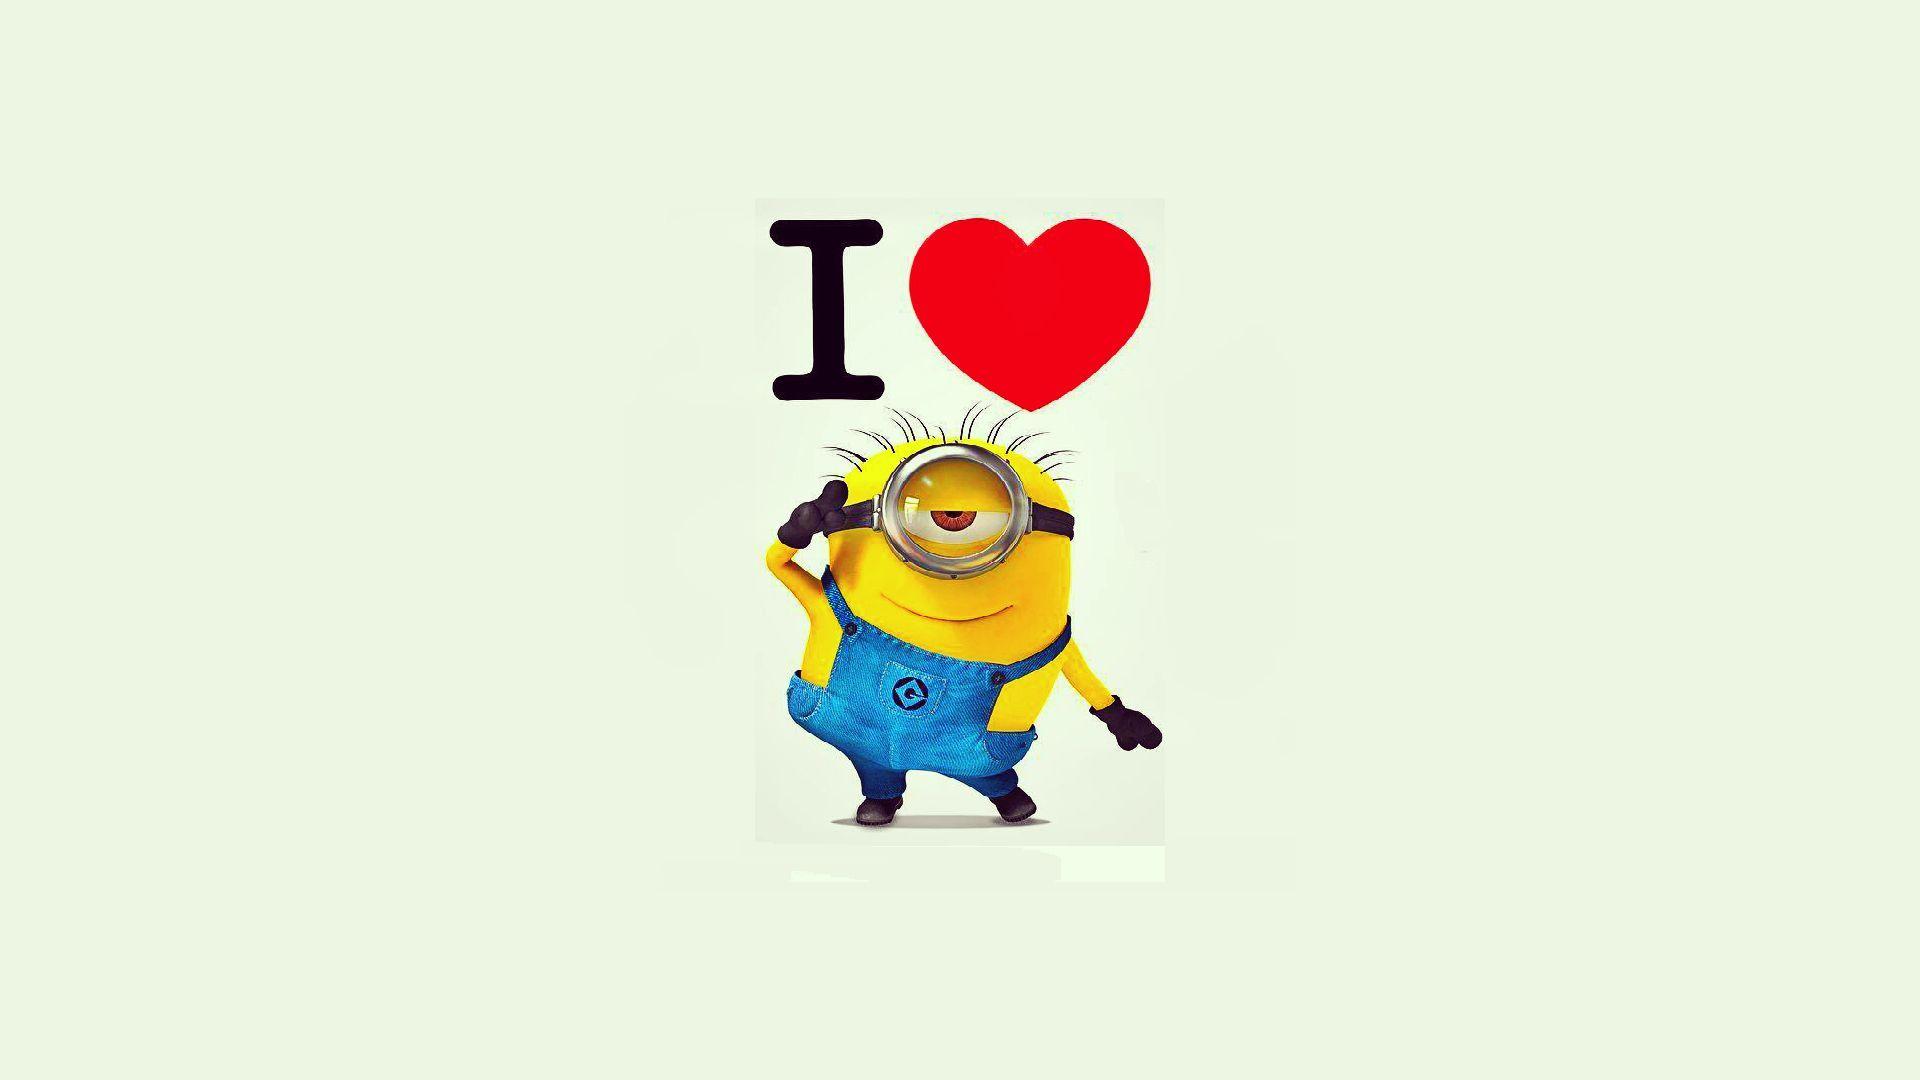 image with minion